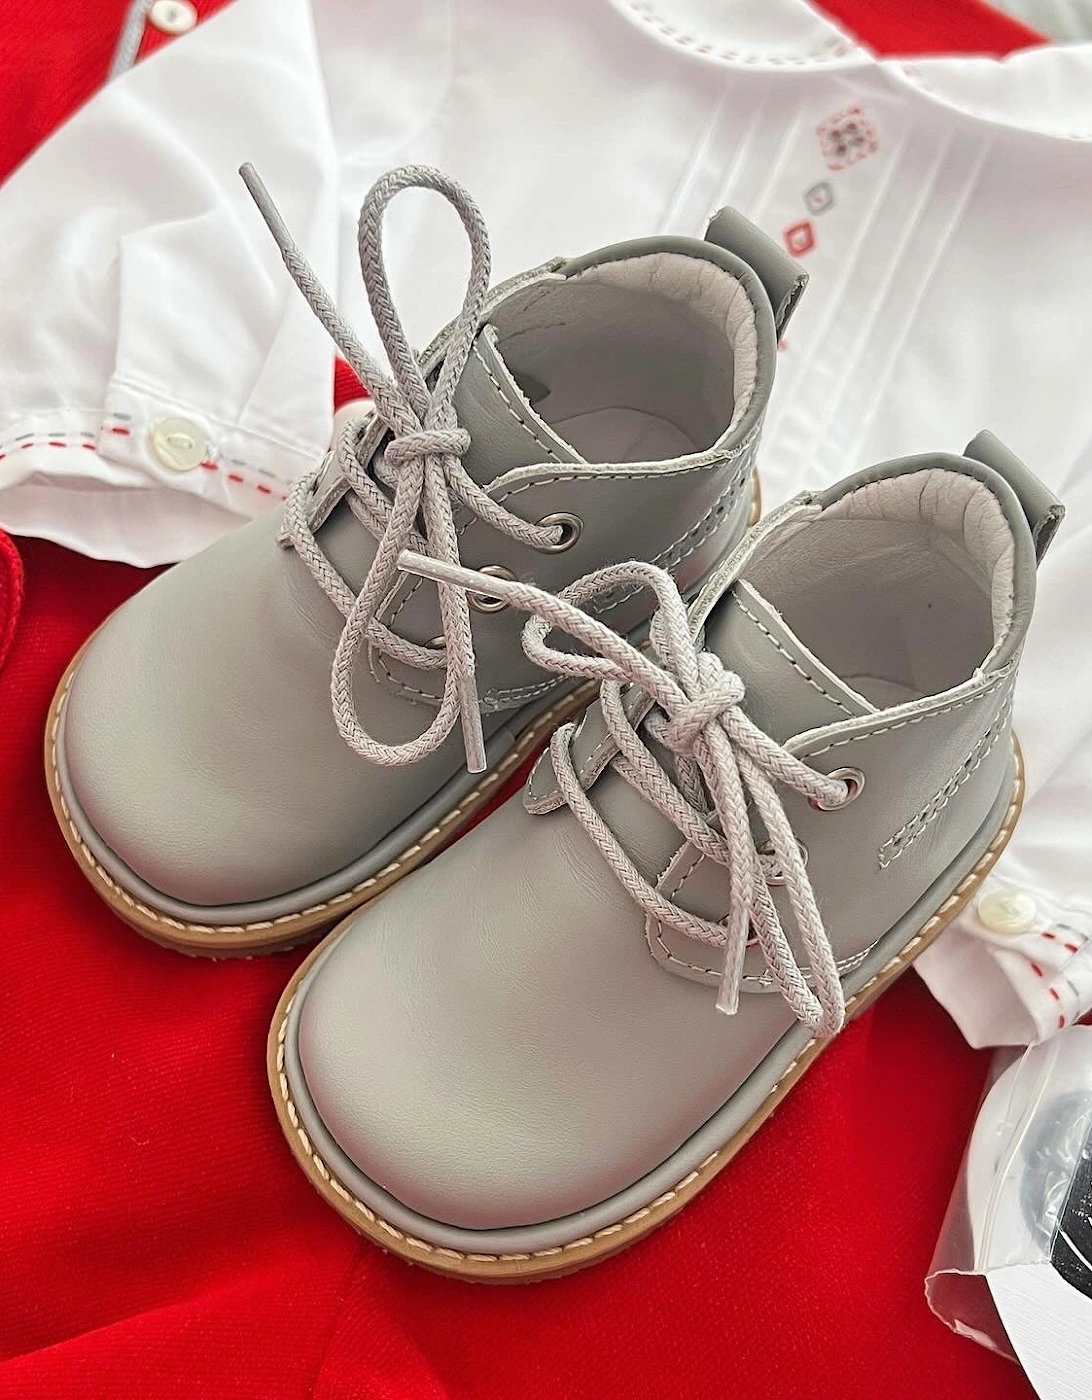 Grey Leather Zachary Lace Up Boots